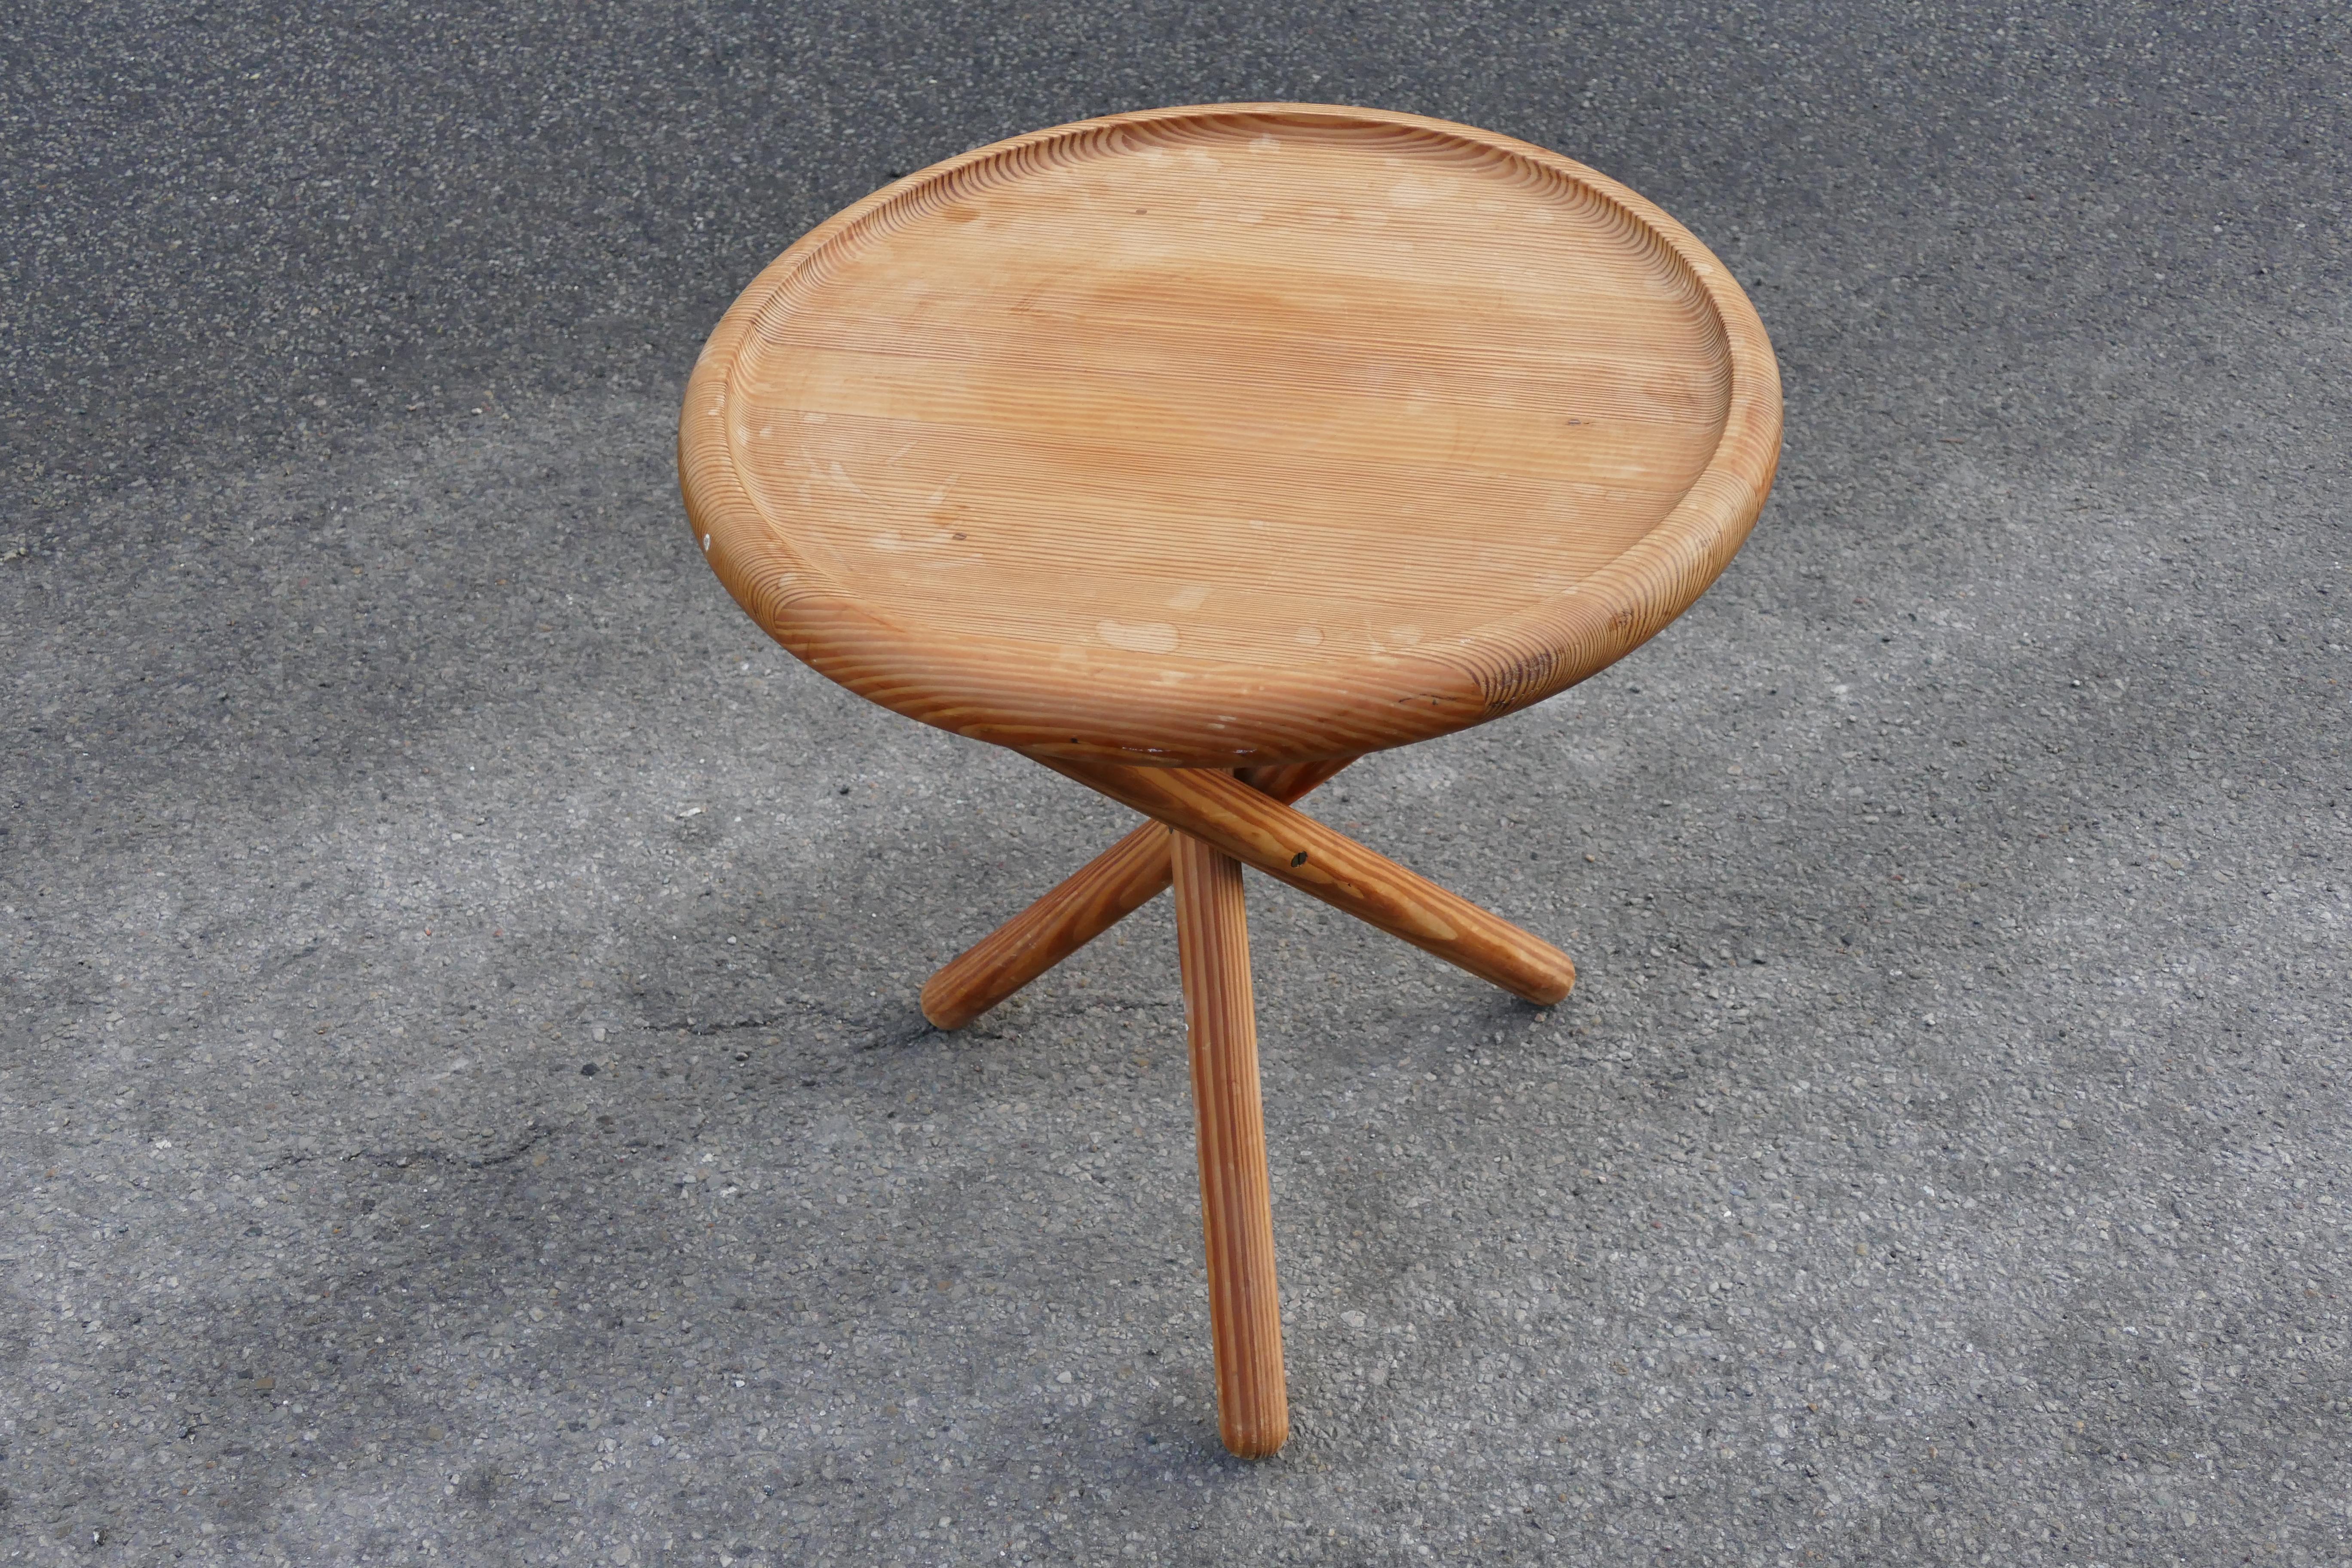 Foldable 'Hunting table' in pine. Beautiful lines and craftmanship in best scandinavian midcentury style.